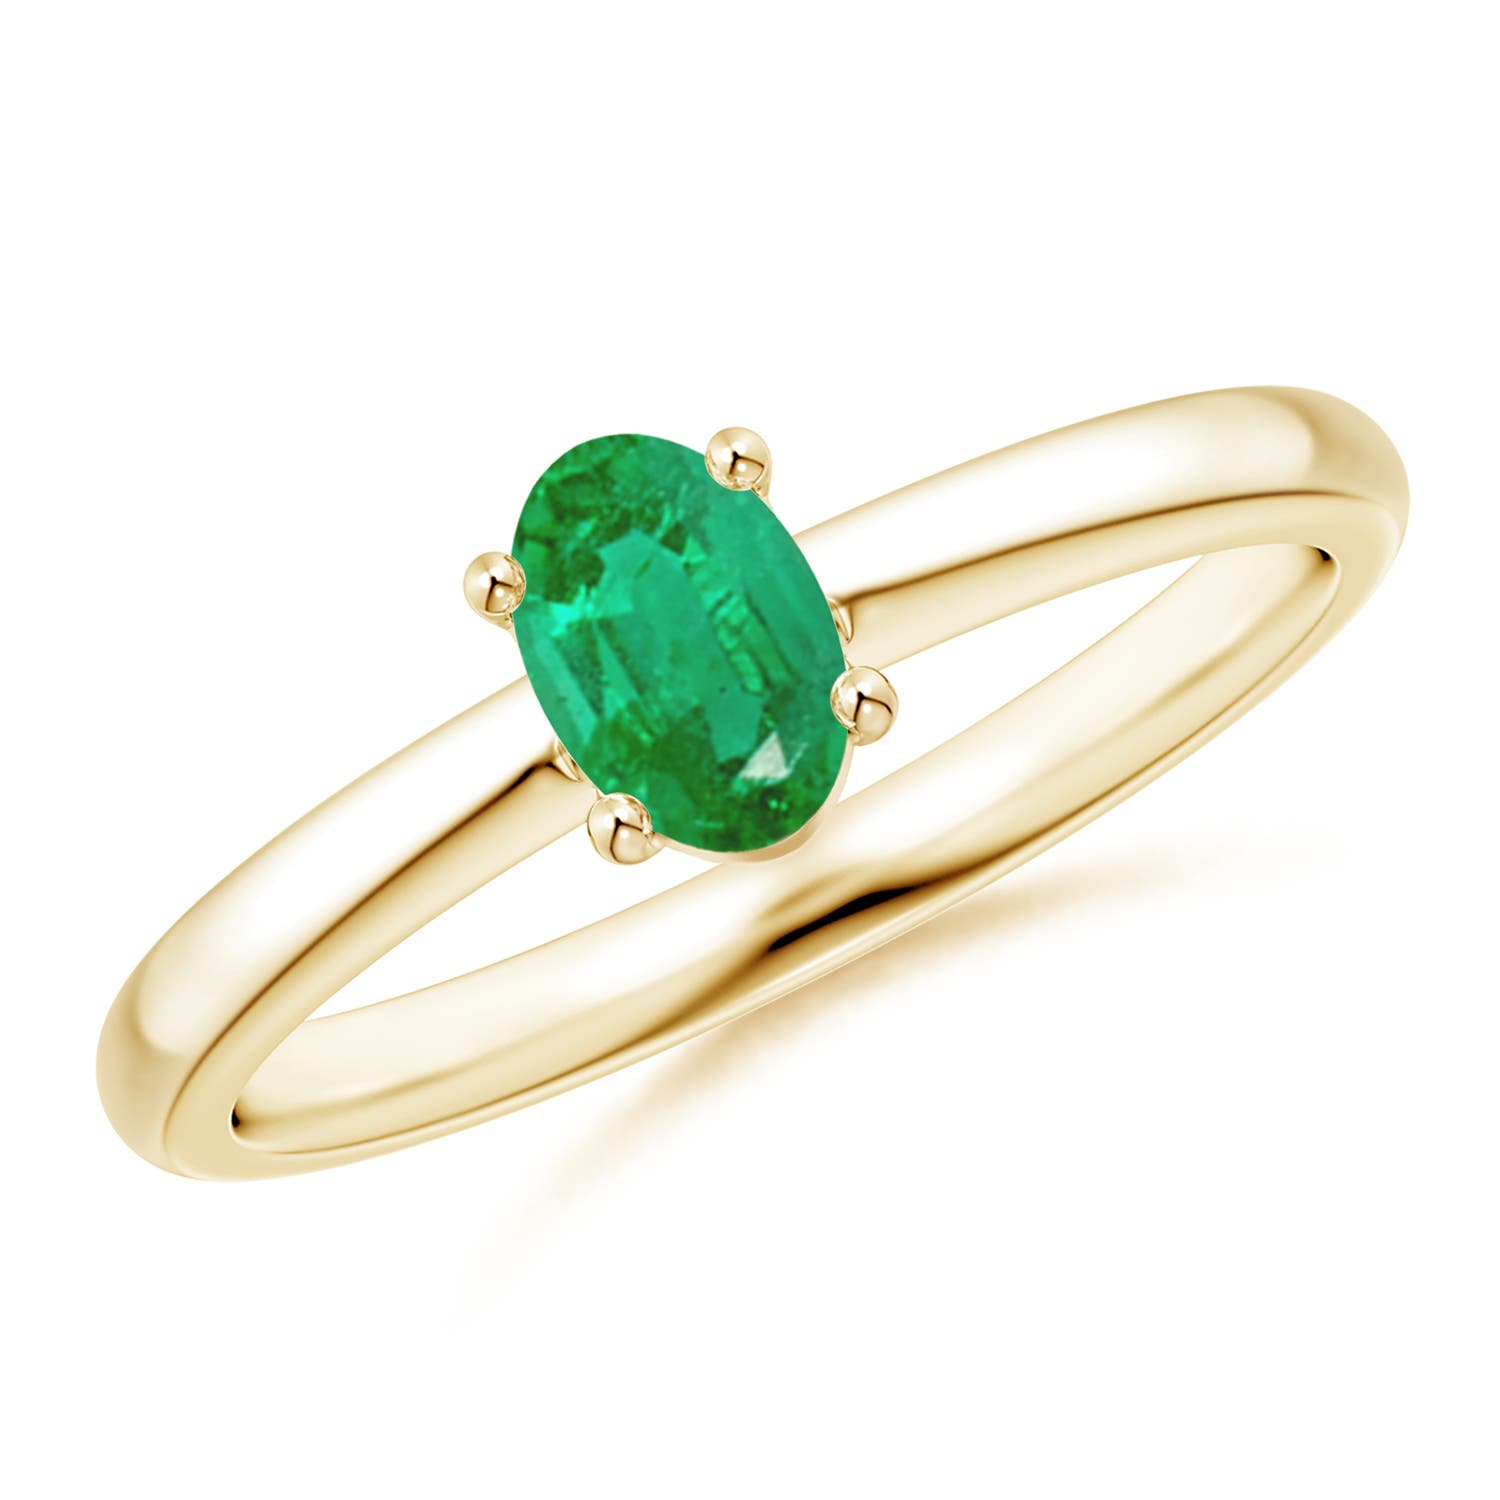 AA - Emerald / 0.4 CT / 14 KT Yellow Gold